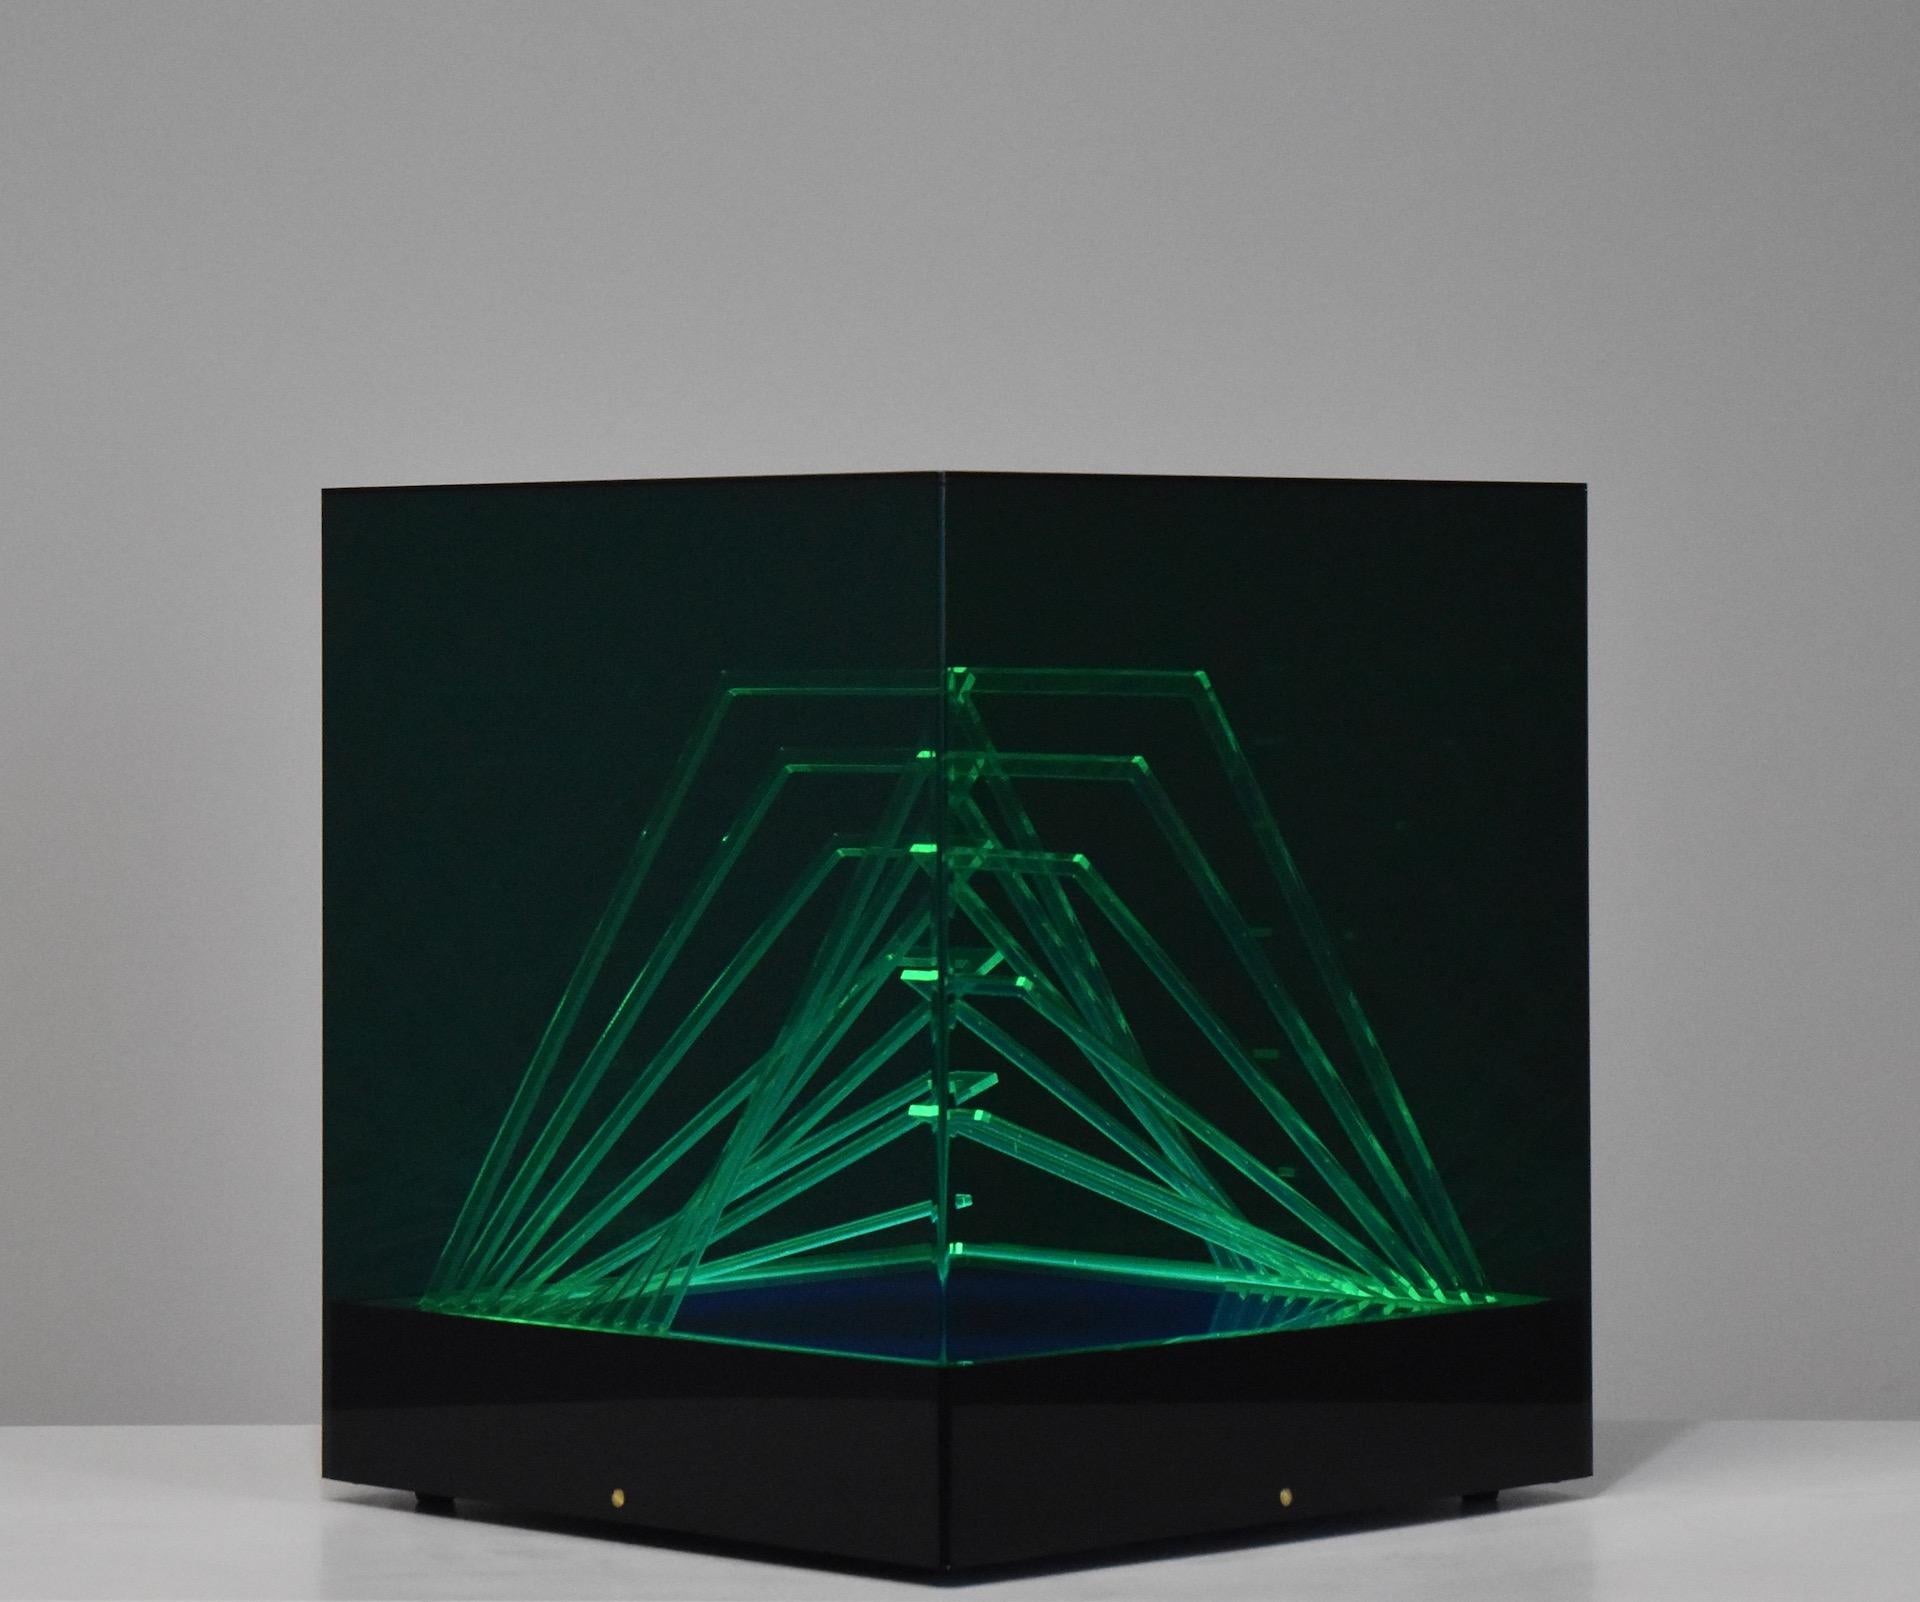 rare Iluminated sculpture named Cubo di Teo designed by James Rivière in 1970's and edited by Centro Ricerche di Arte Industria Lissone, Italy. Colored acrylic pieces and base with internal light.